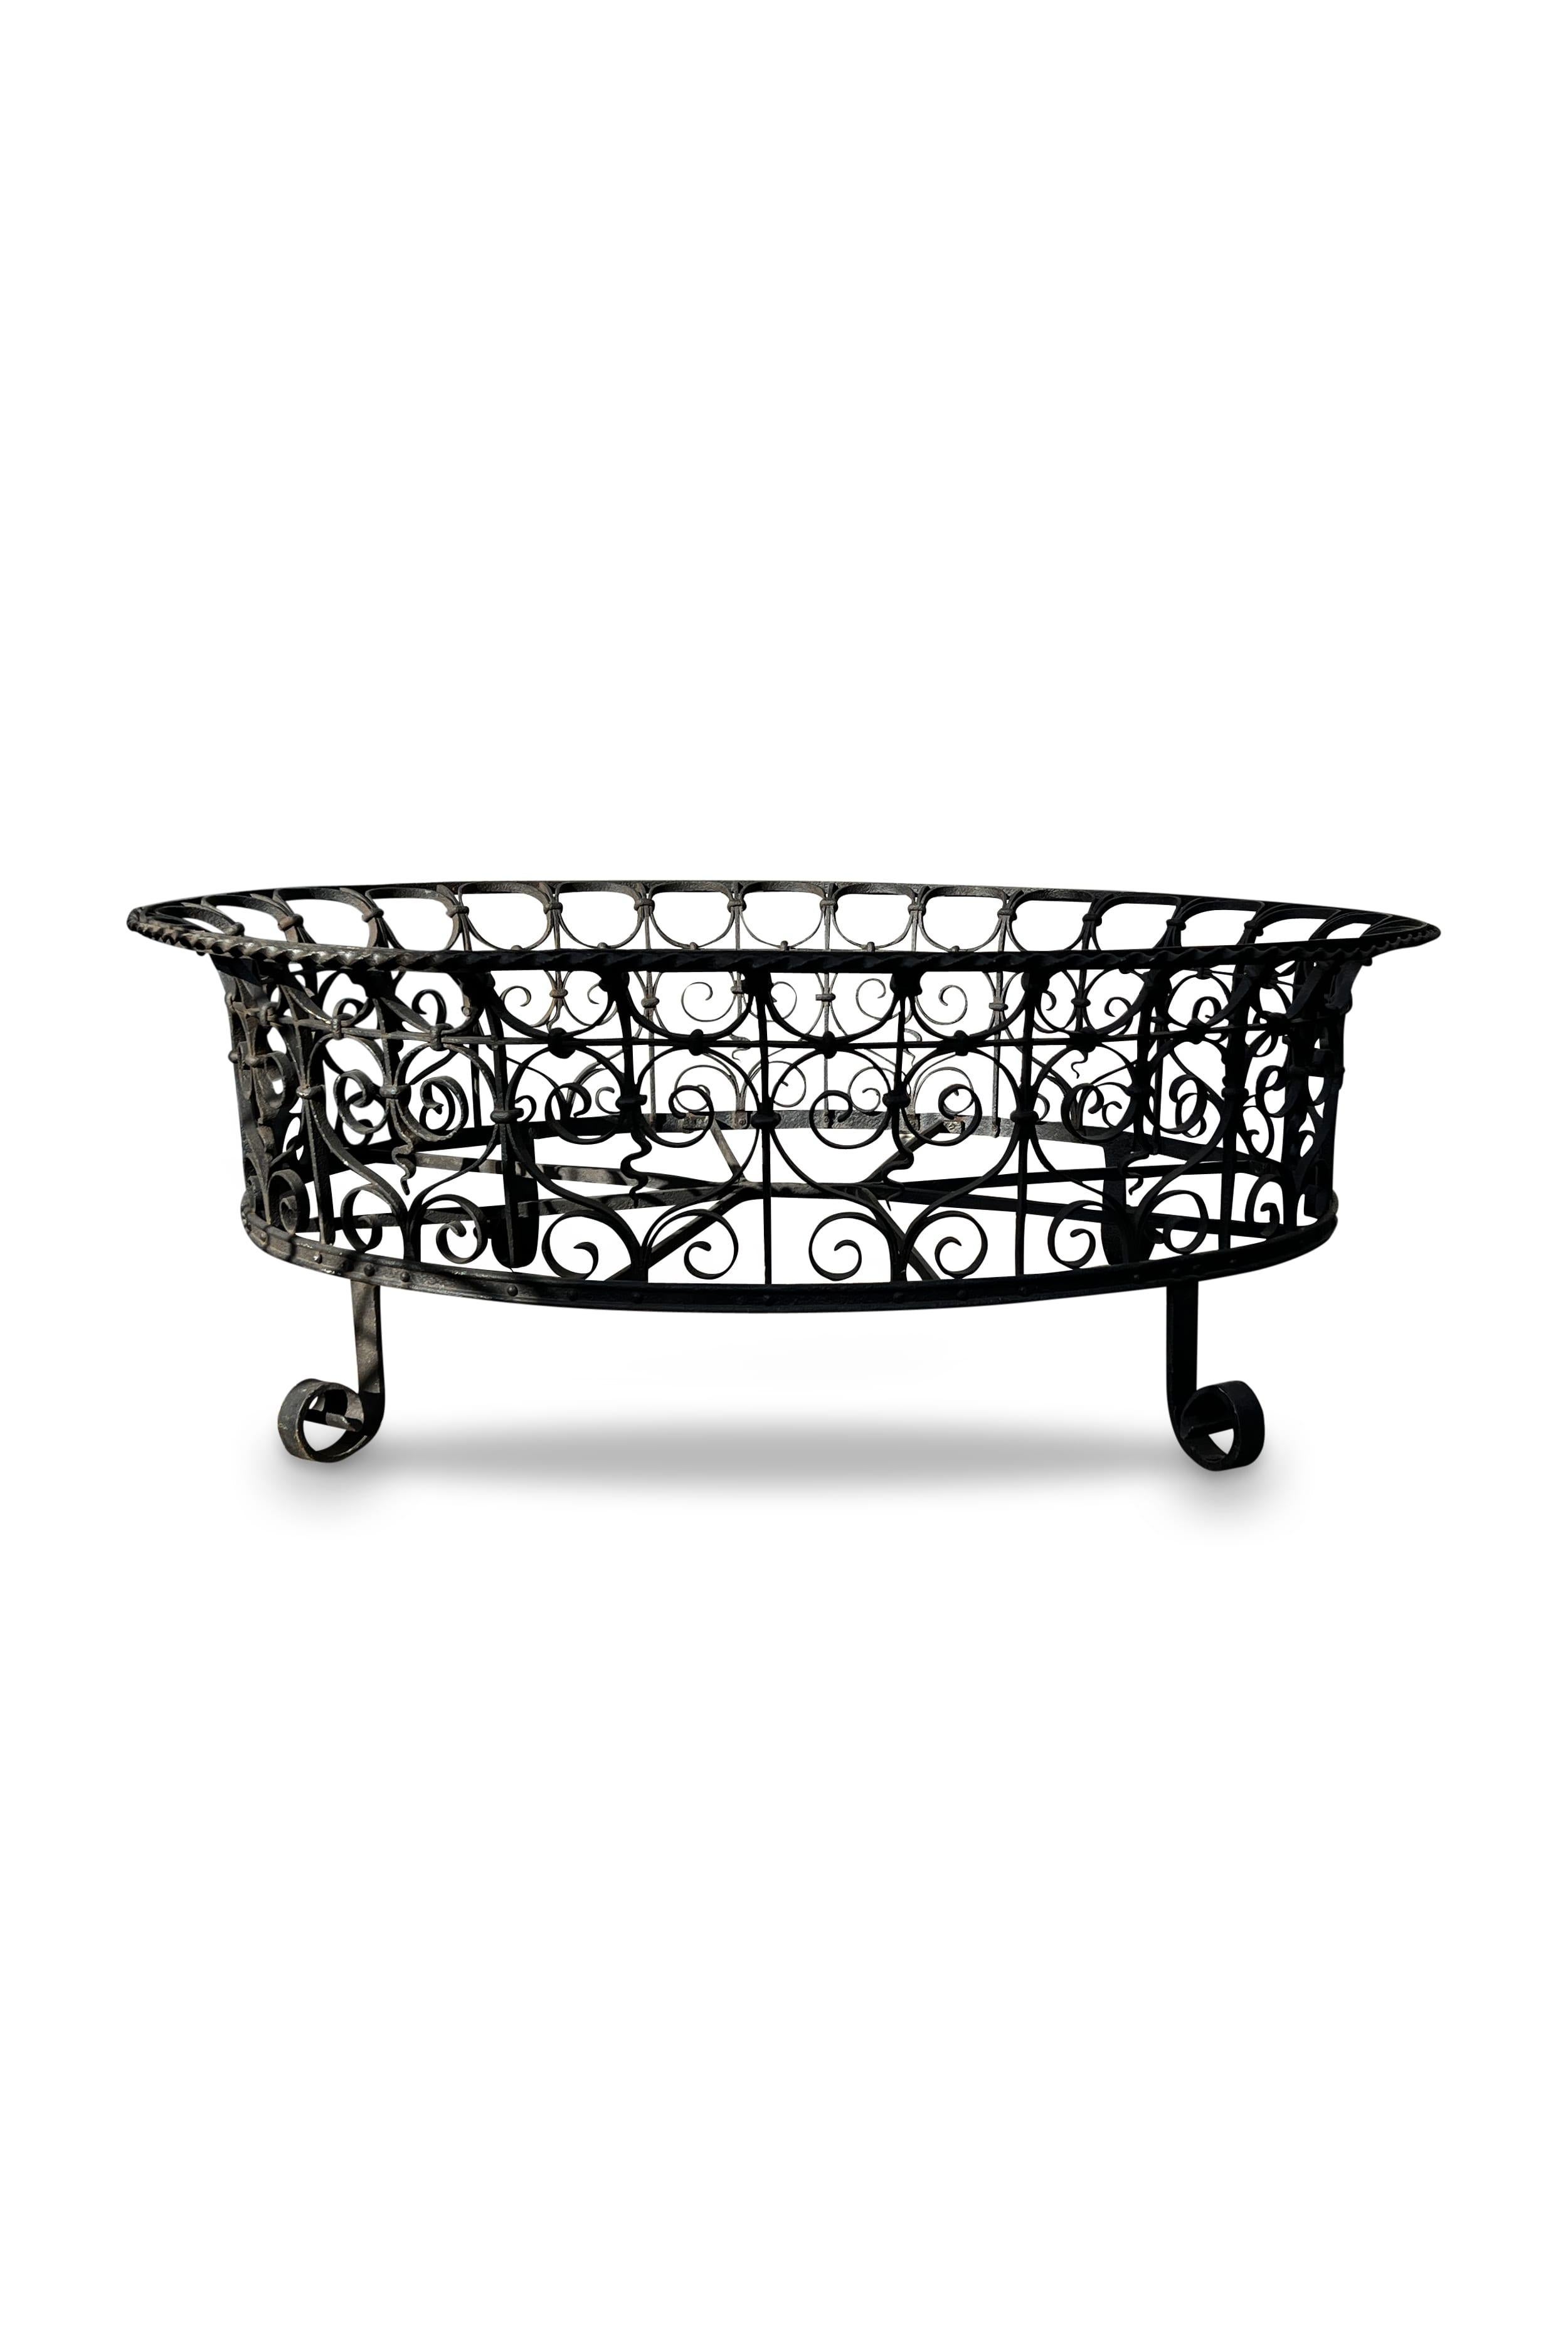 Immerse in timeless elegance with decorative scrollwork, dark hues, and a natural patina. A garden statement inspired by classic design.

Measurements: 44” L x 35.5” W x 16” H 

Condition: Consistent with antique age and usage.